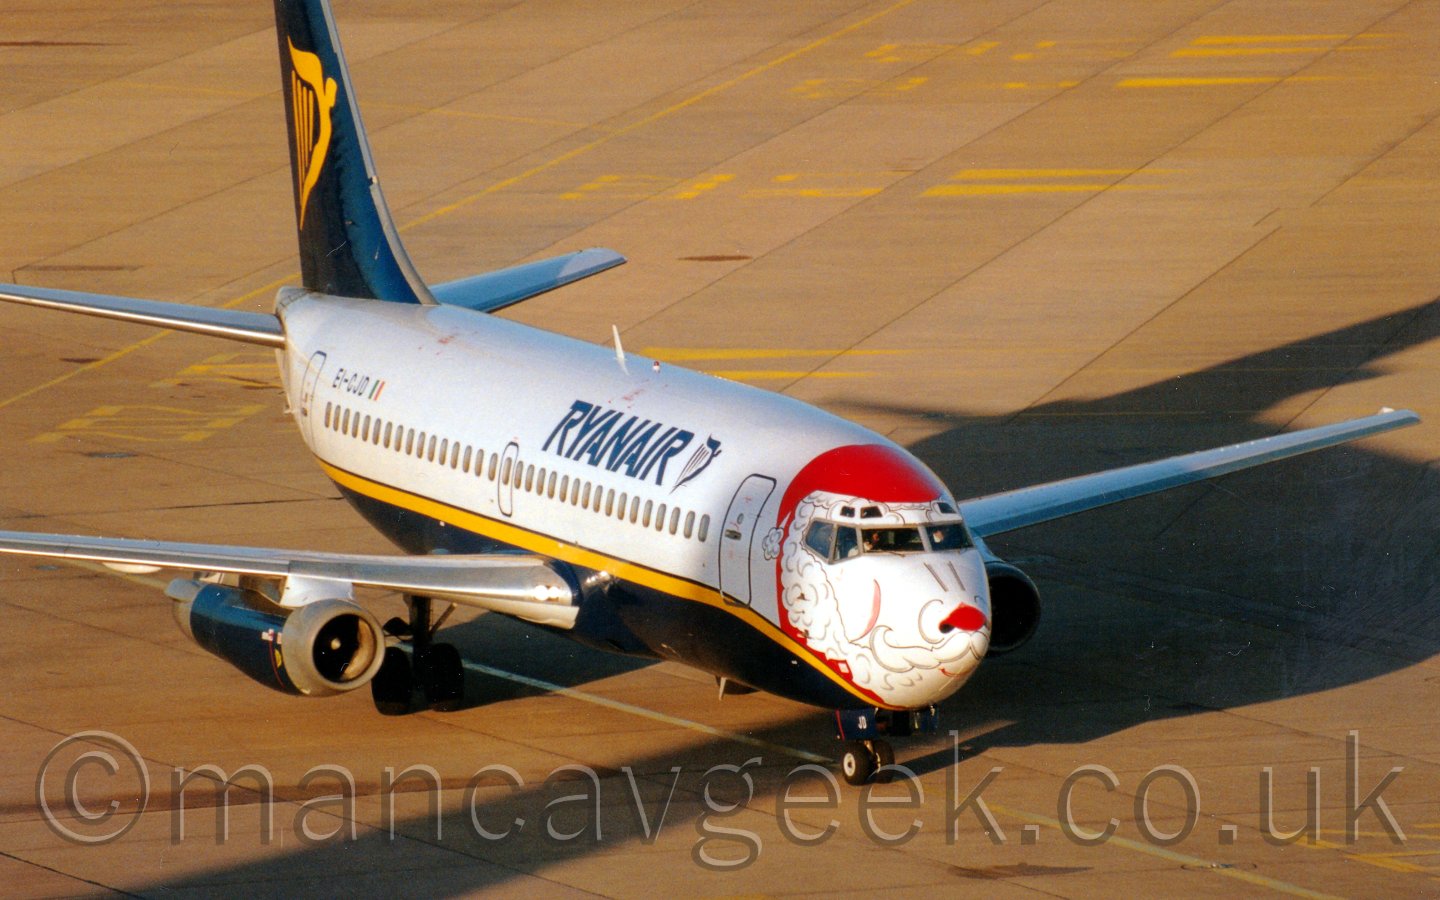 Side view of a white and blue, twin engined jet airliner, with blue "Ryanair" titles on the forward fuselage, and the face of a white bear wearing a red Santa hat and red nose painted around the cockpit, taxiing from left to right, in bright sunshine.